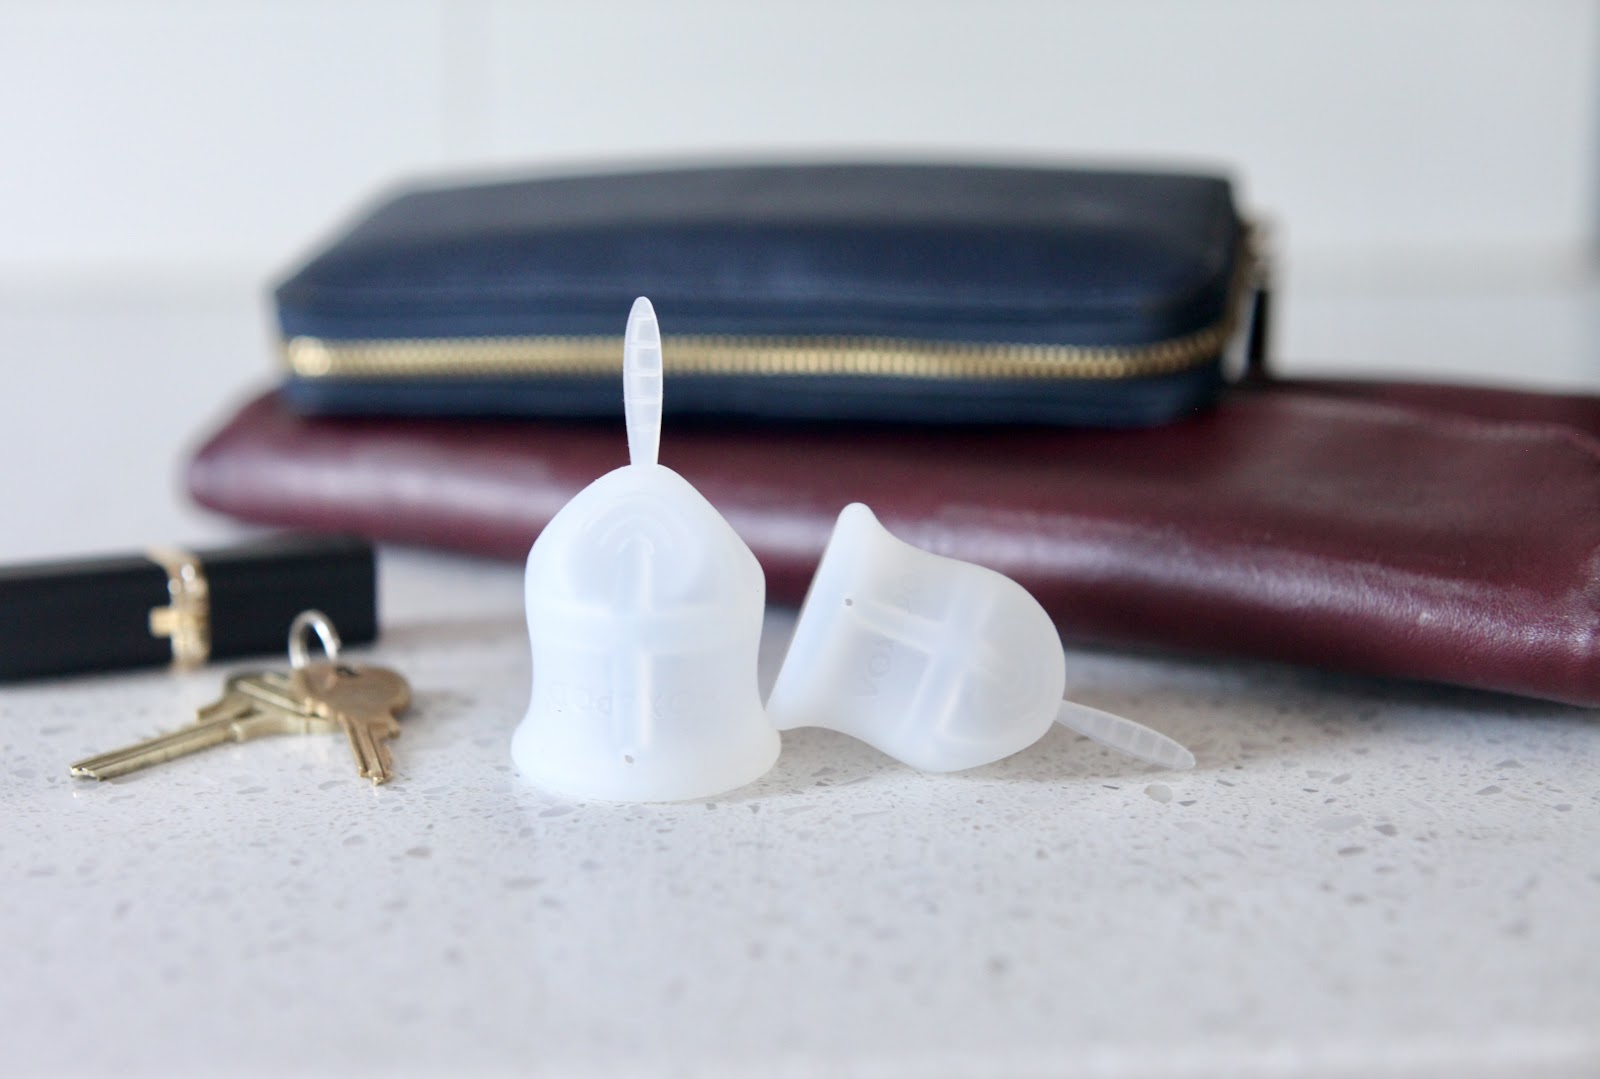 What is a menstrual cup and how does it work?